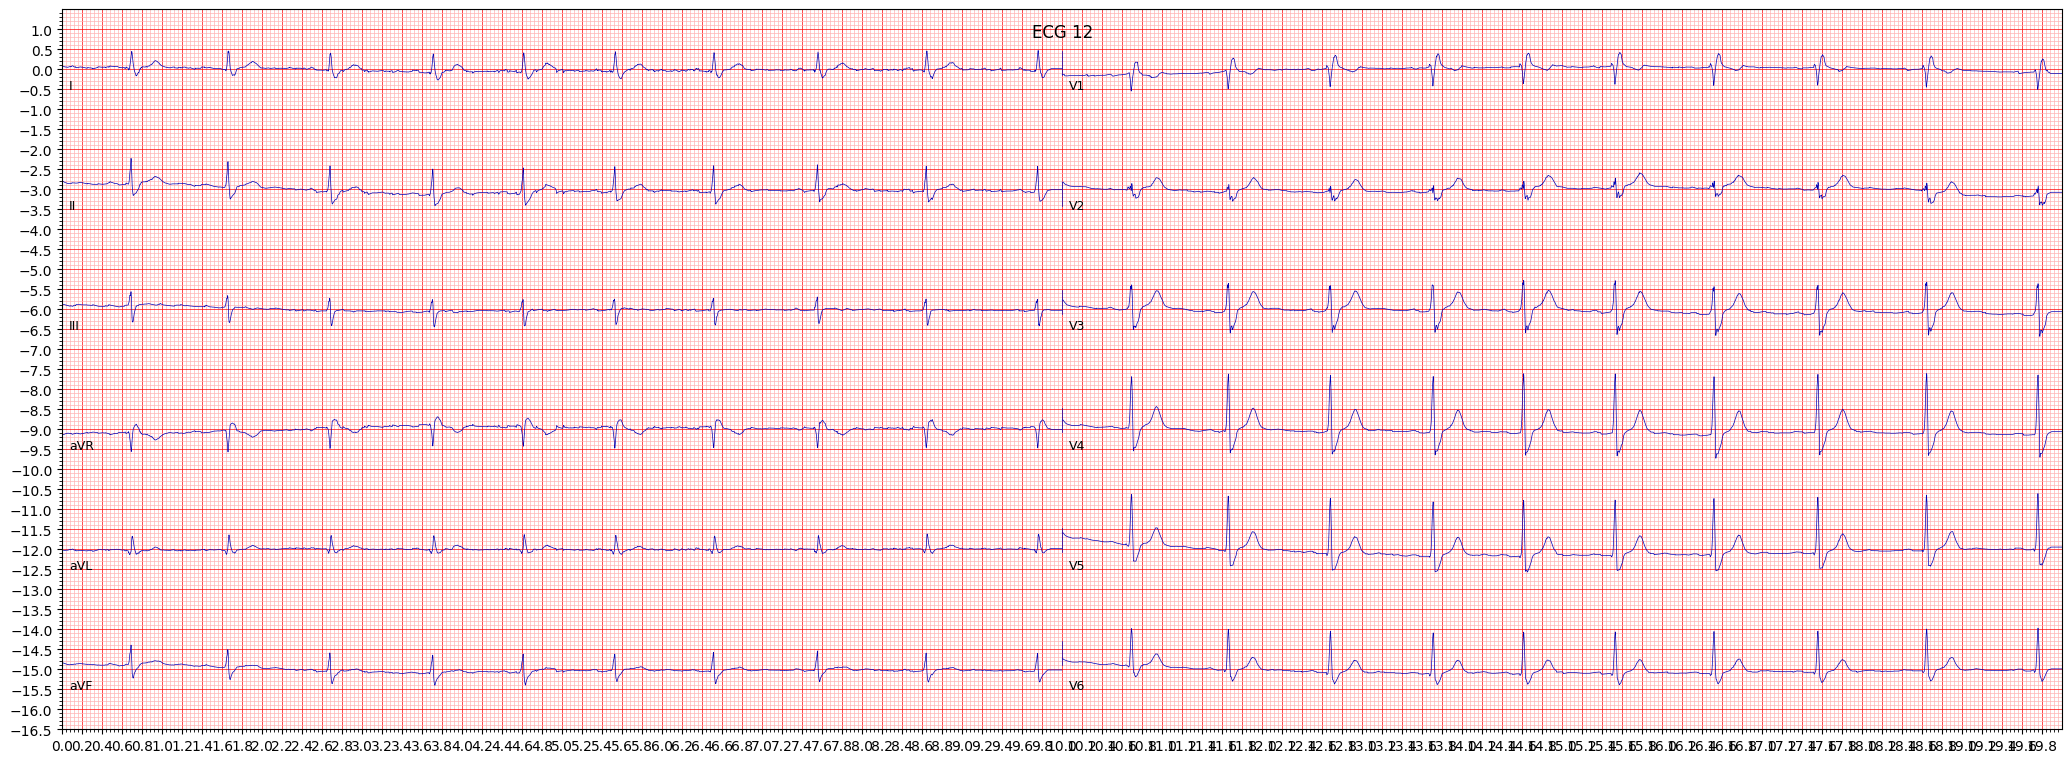 incomplete right bundle branch block (IRBBB) example 836